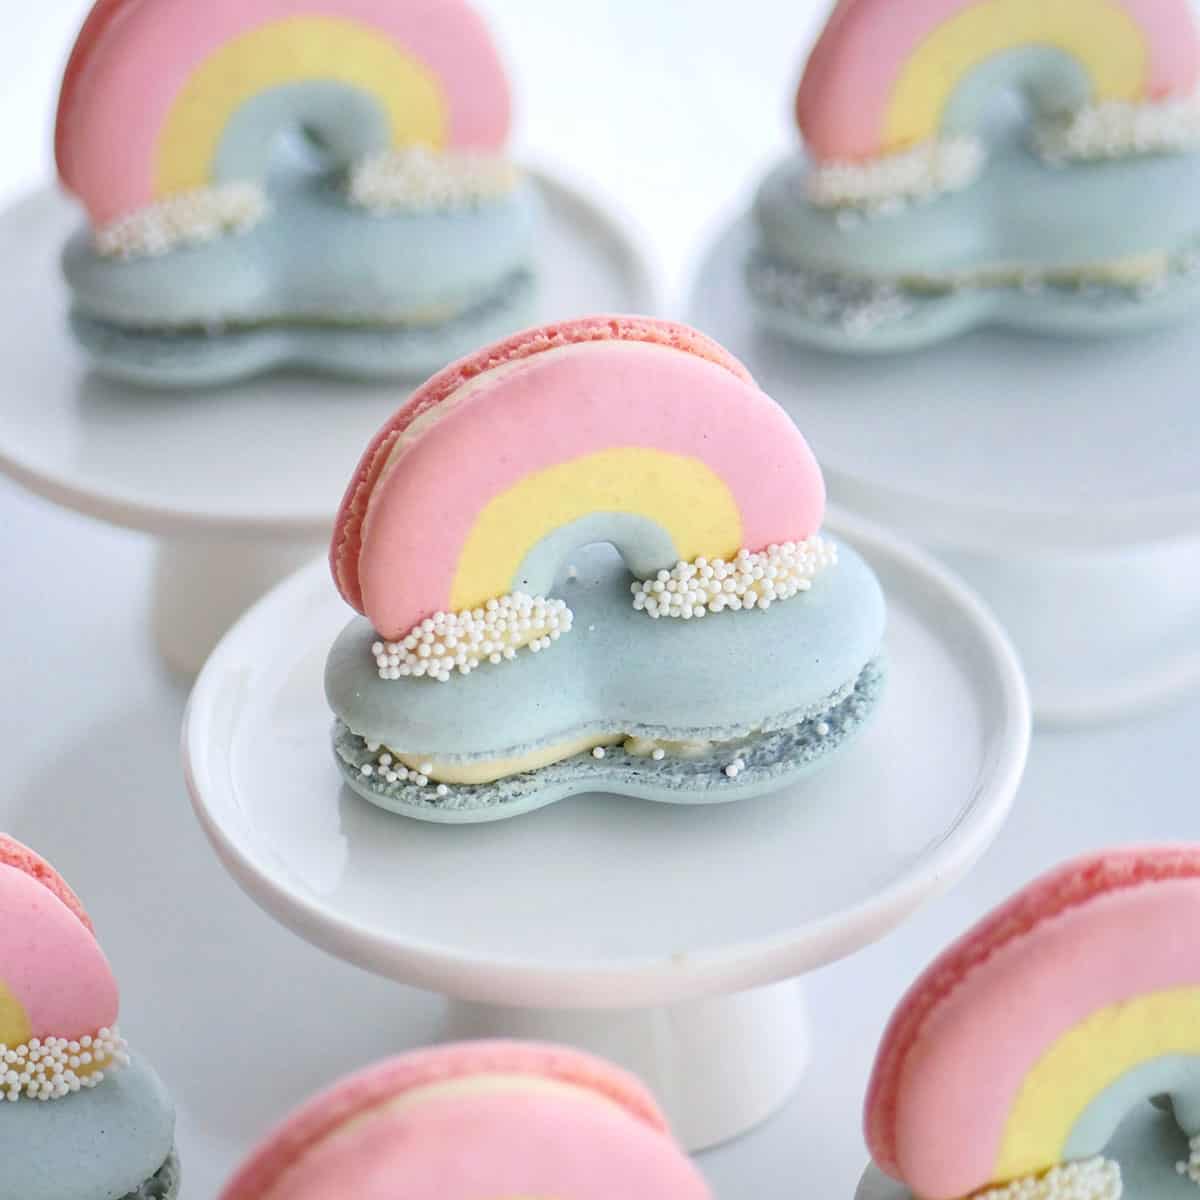 3D rainbow macarons perched on top of a cloud macaron.